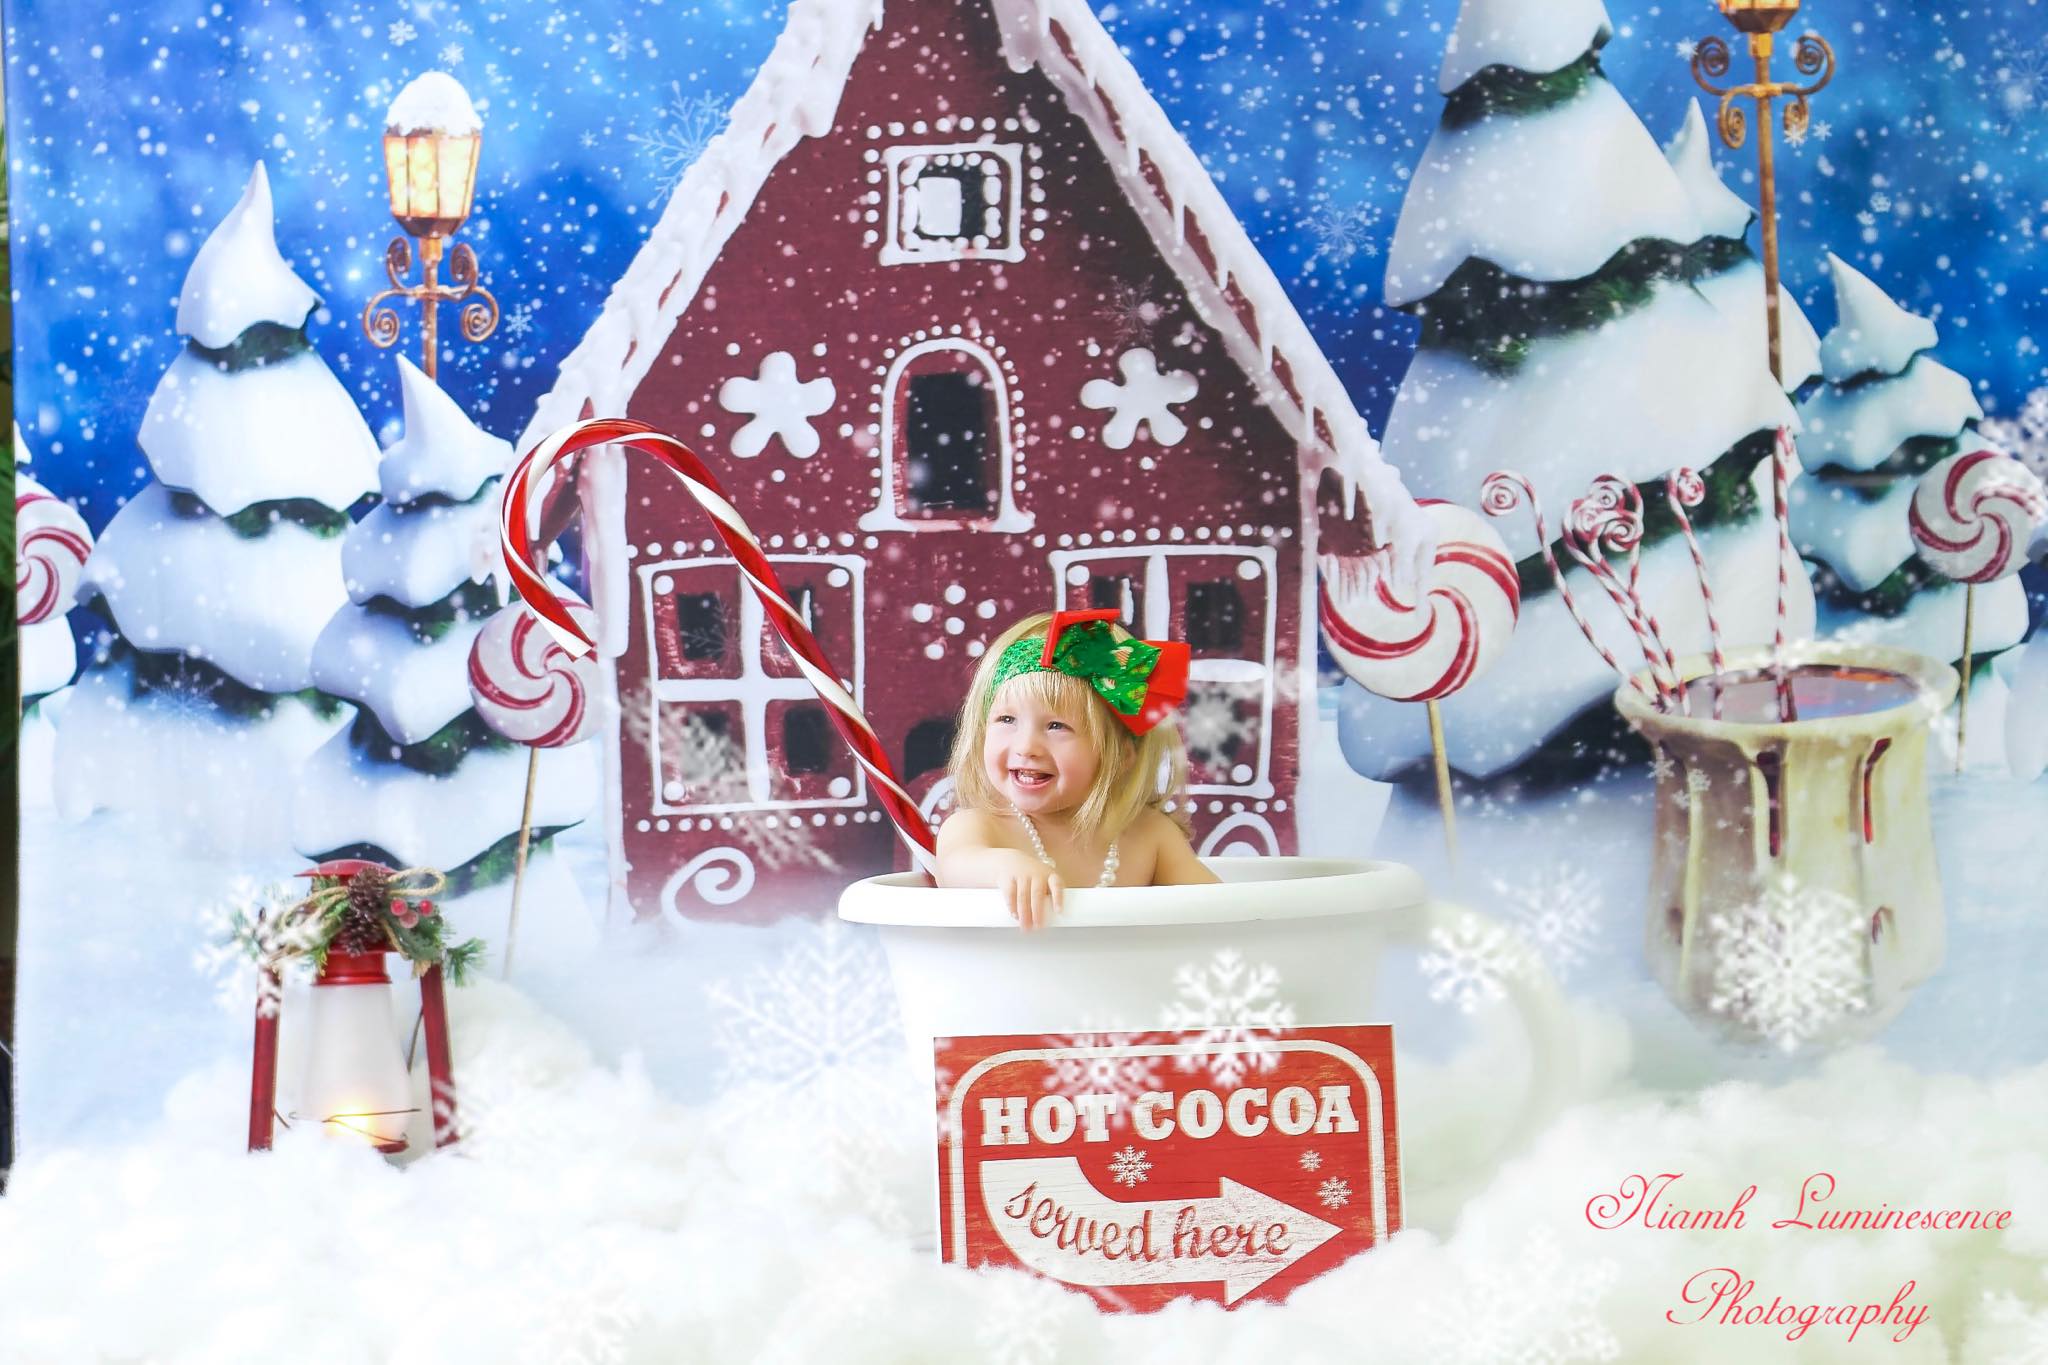 Kate Christmas Gingerbread House Snow Backdrop for Photography